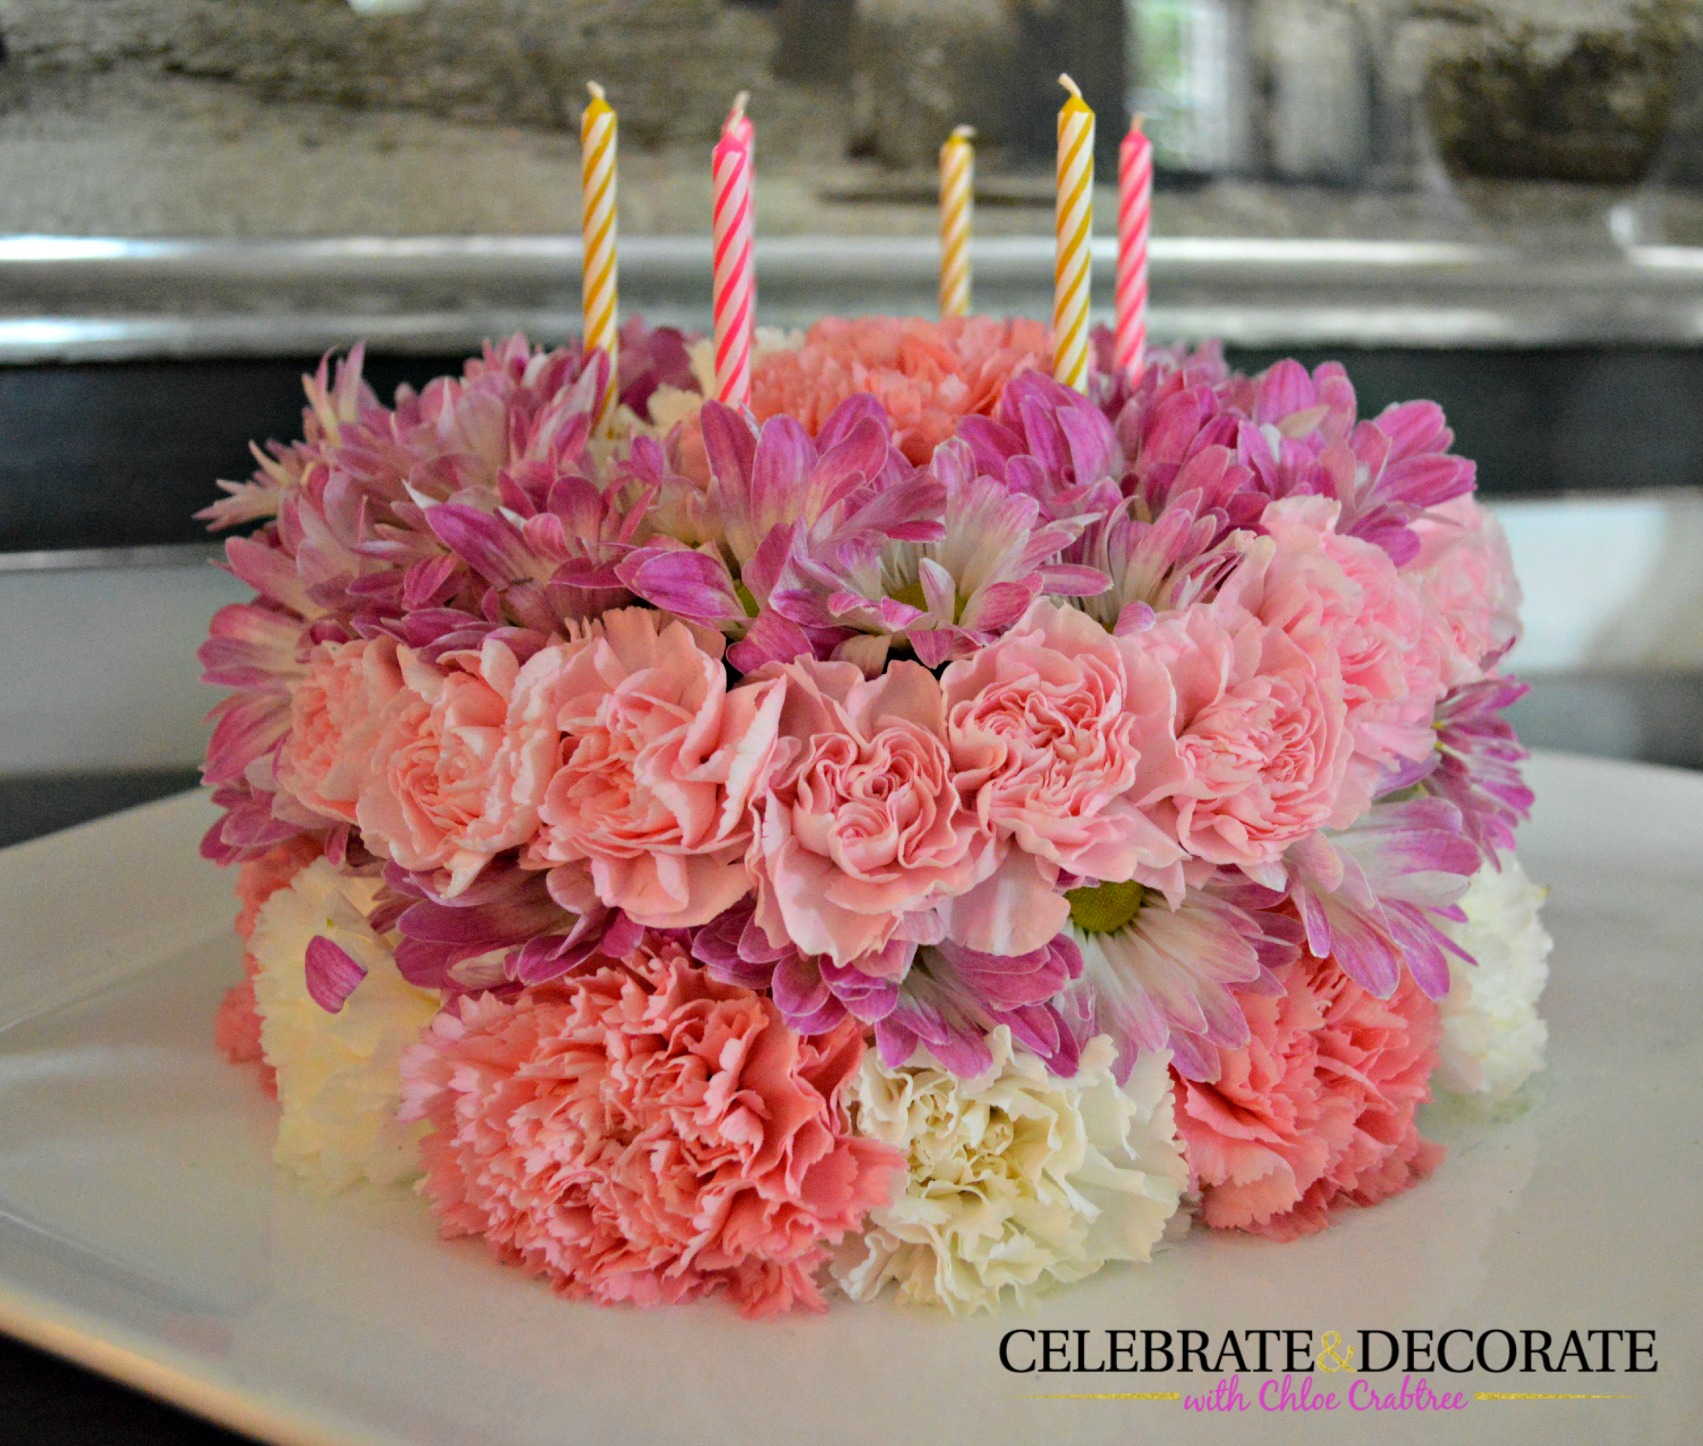 How to Make a Floral Birthday Cake